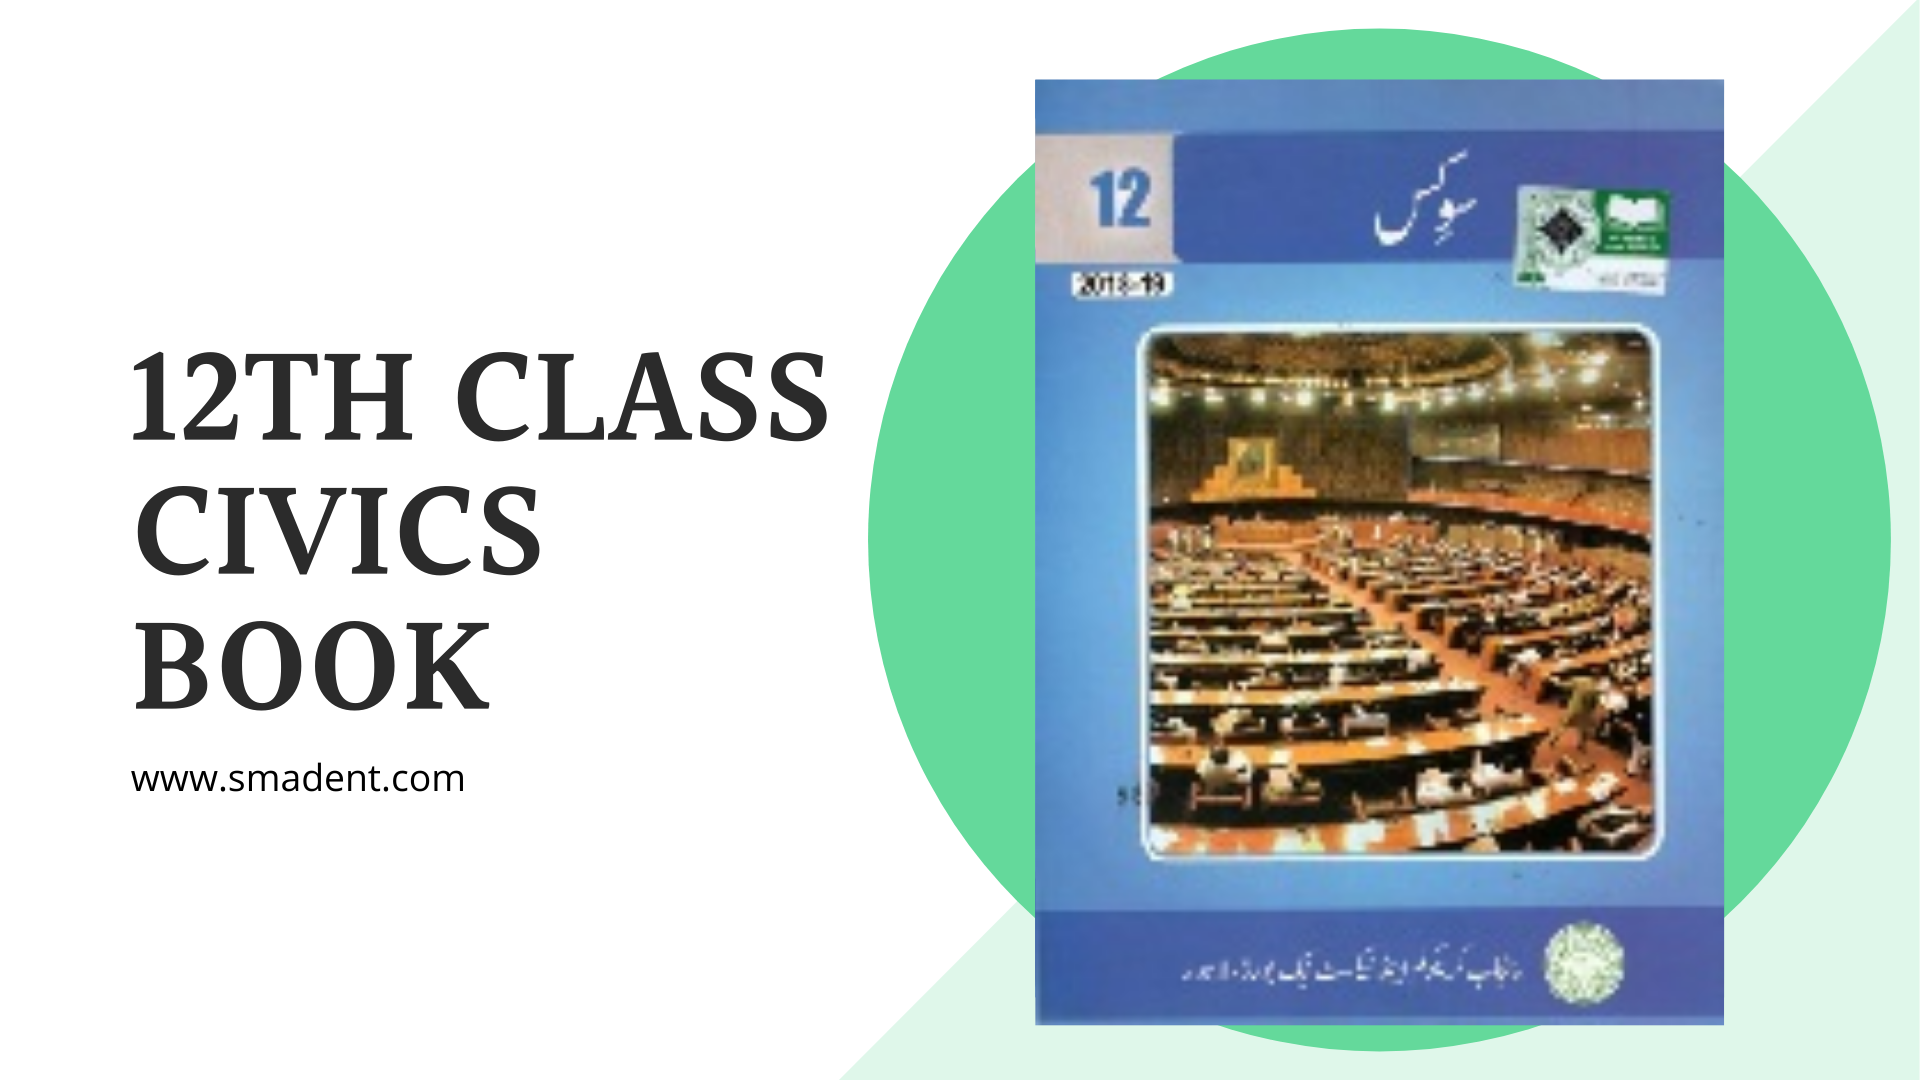 12th Class Civics Textbook - Read or Download